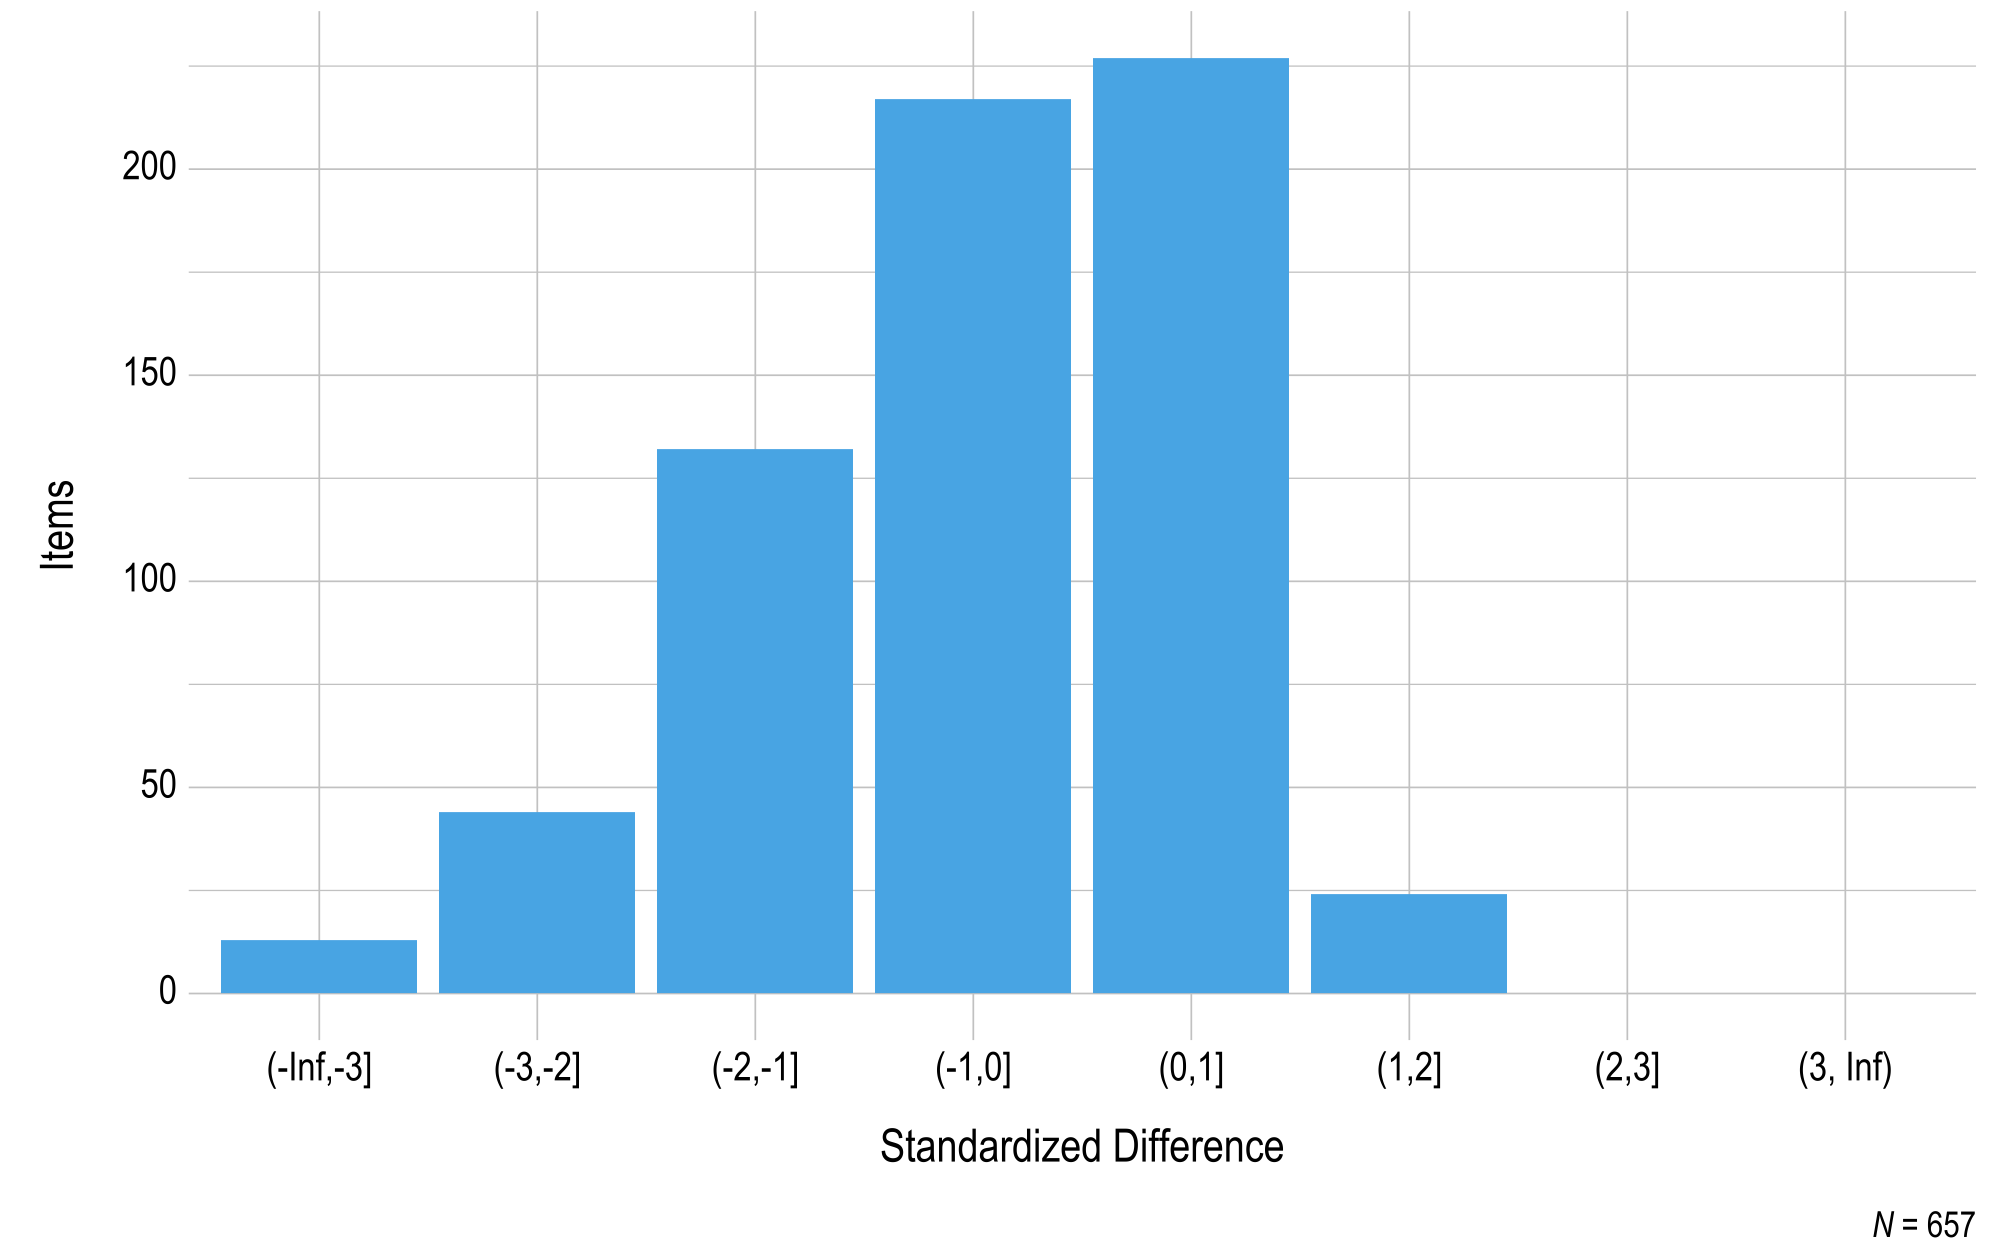 This figure contains a histogram displaying standardized difference on the x-axis and the number of English language arts field test items on the y-axis.